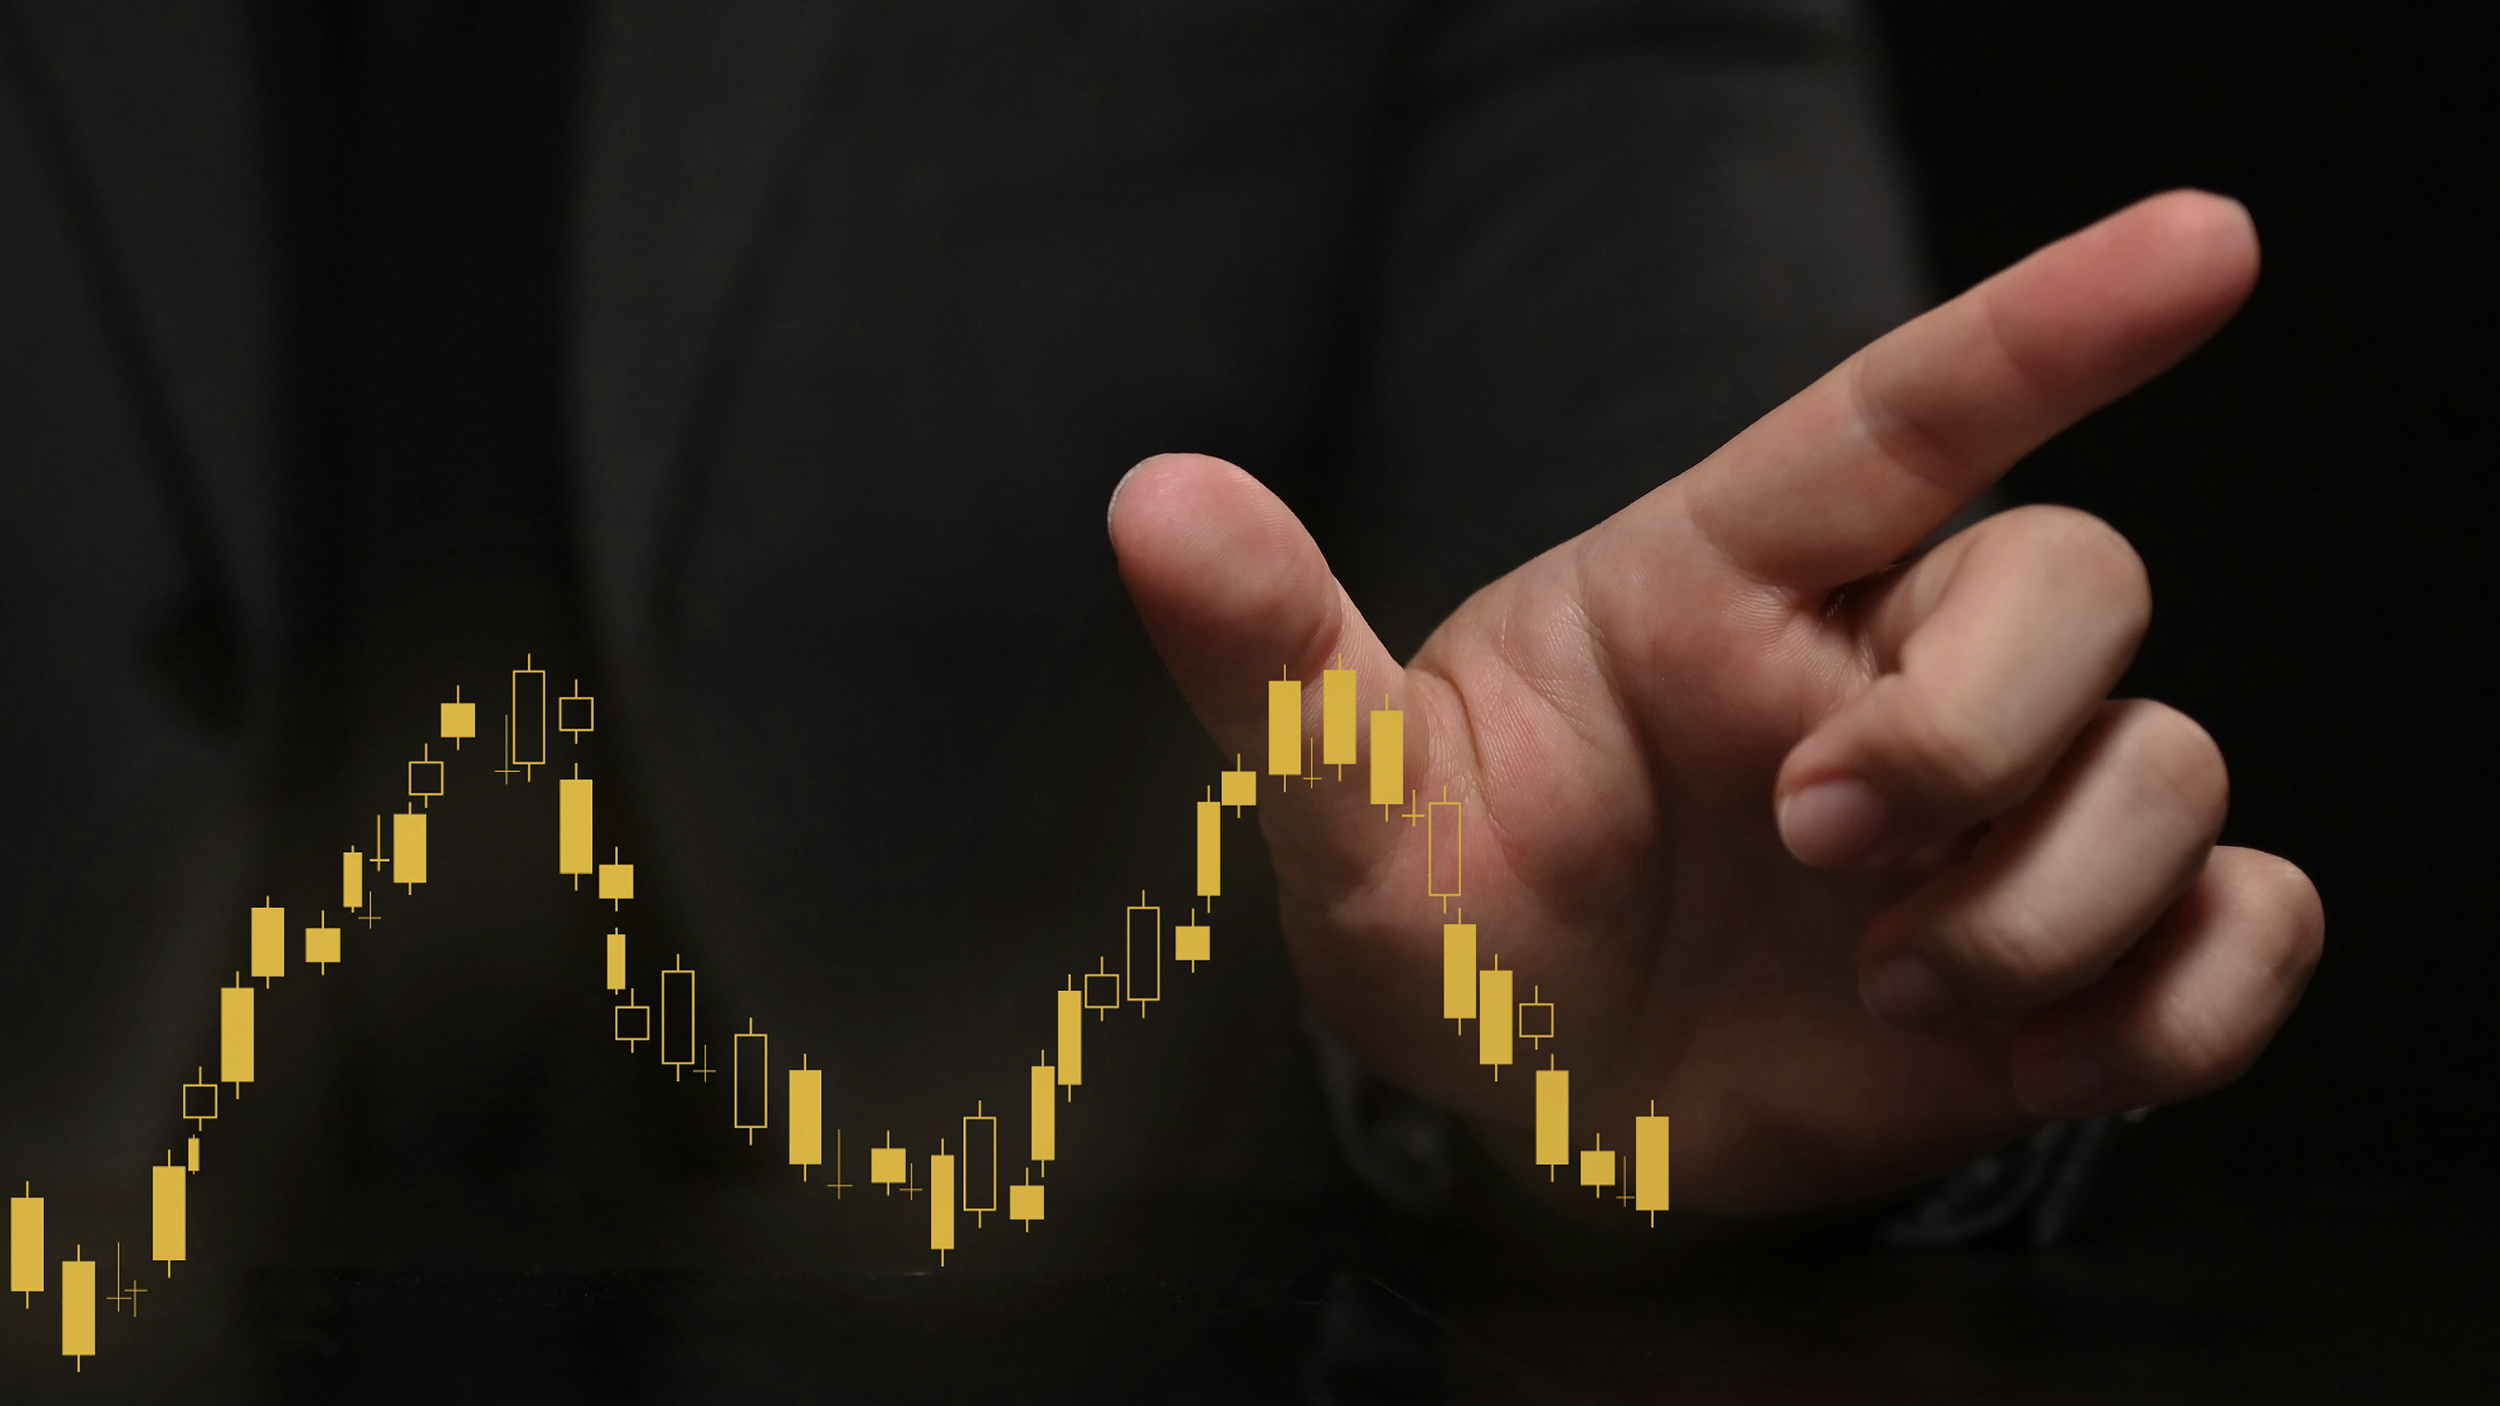 A businessman's hand is pointing at a stock chart, showing intentional growth.